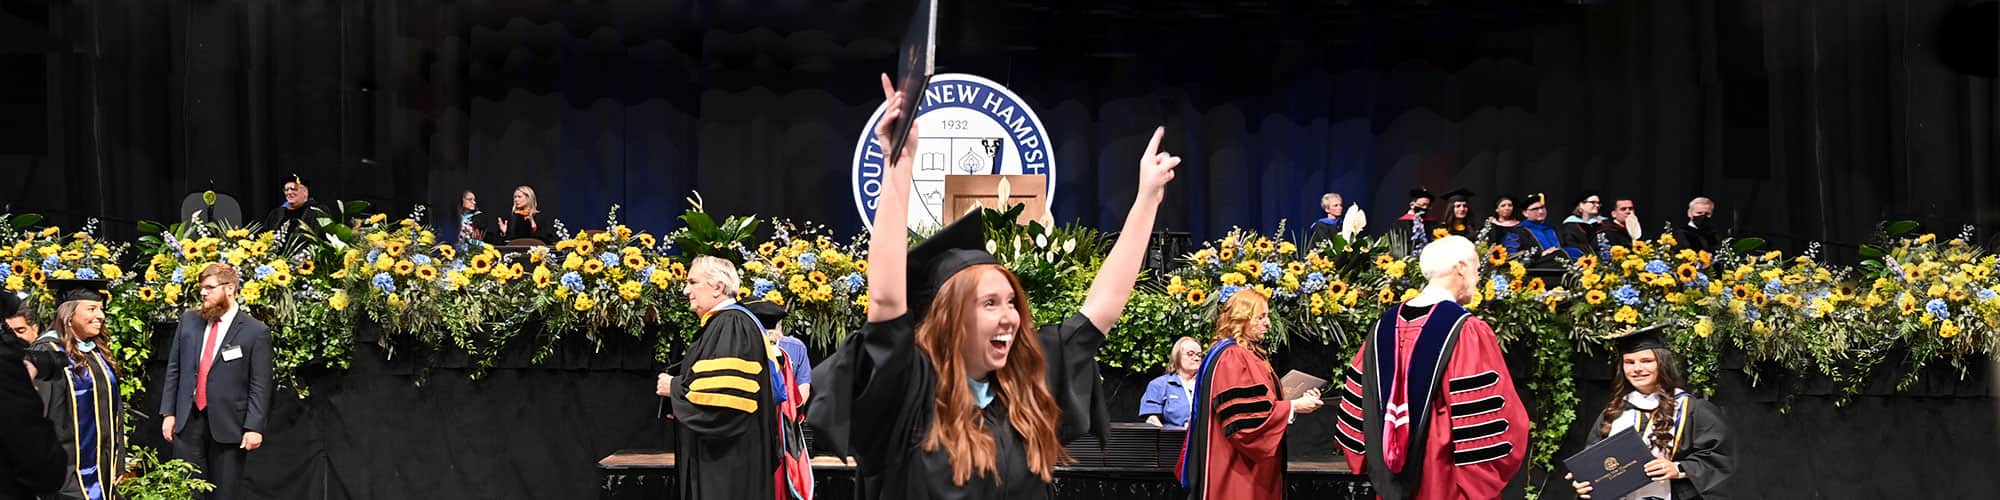 A SNHU graduate celebrating at commencement